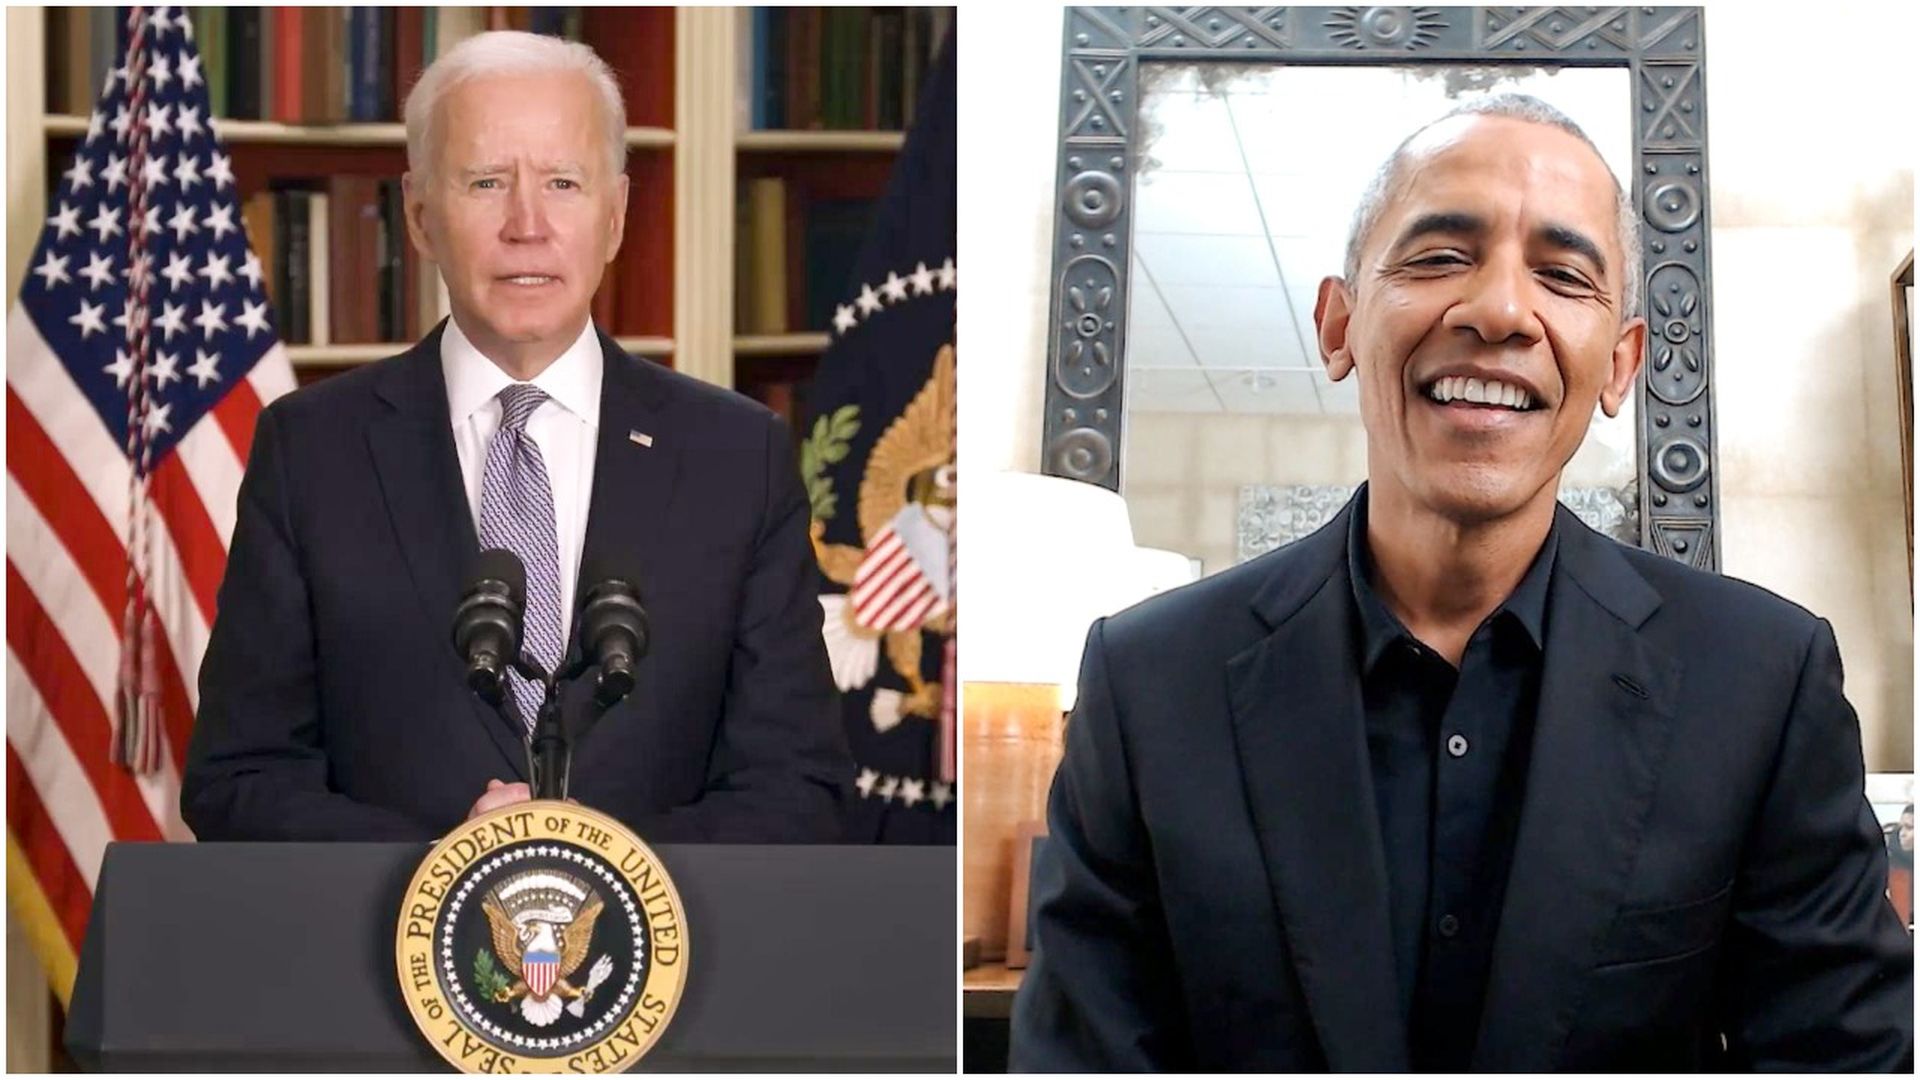 President Biden and former President Obama on NBC's "Roll up your sleeves" event